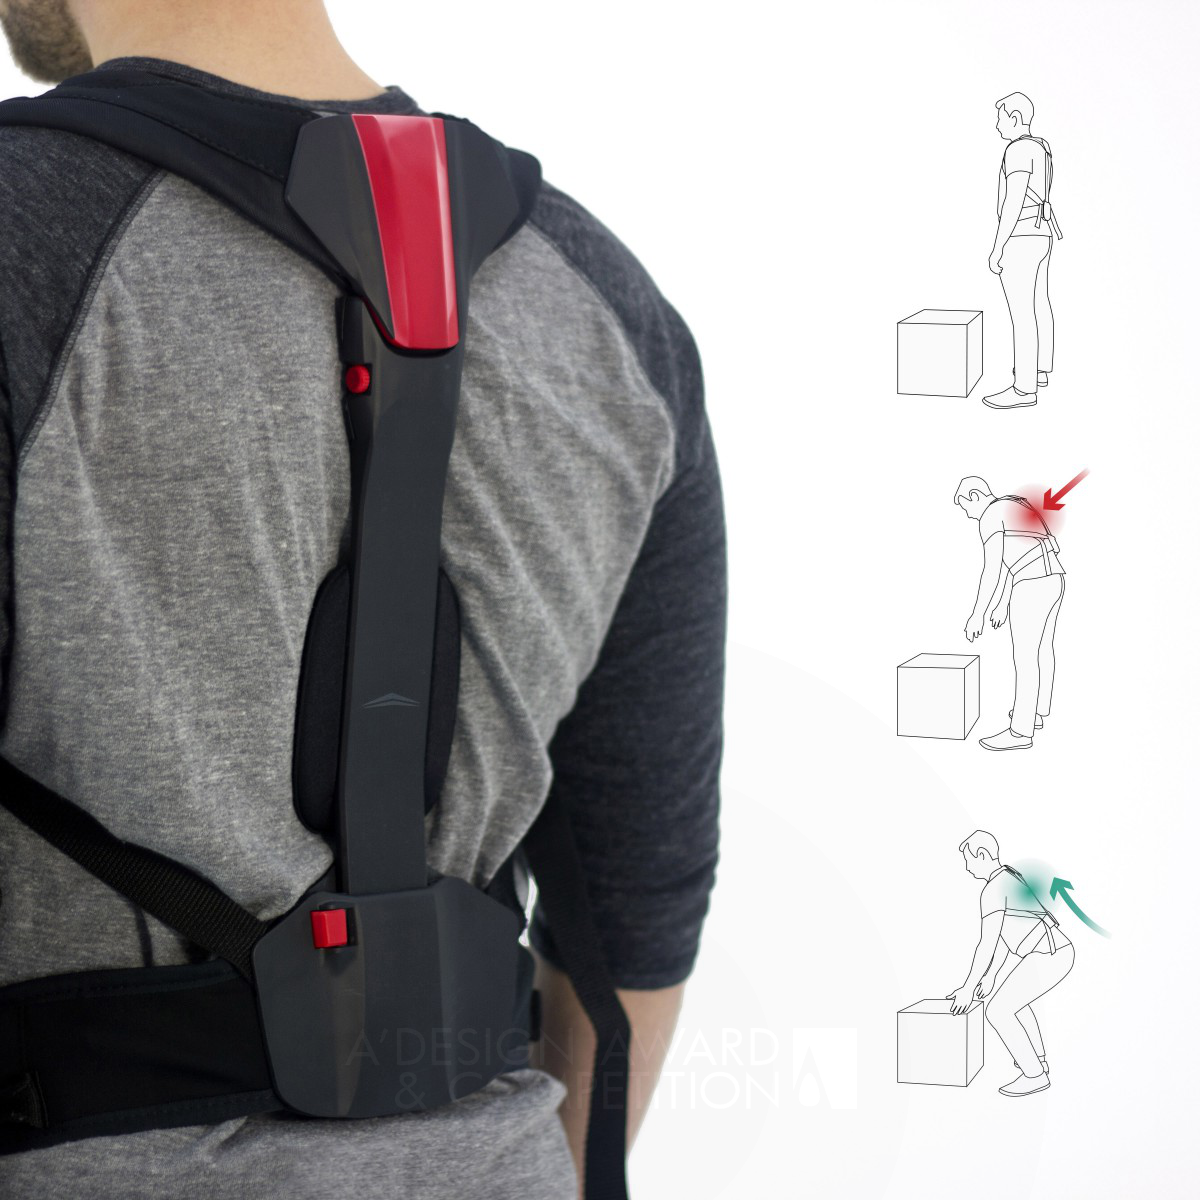 FLx ErgoSkeleton Postural Support Device by Strong Arm Technologies Inc.